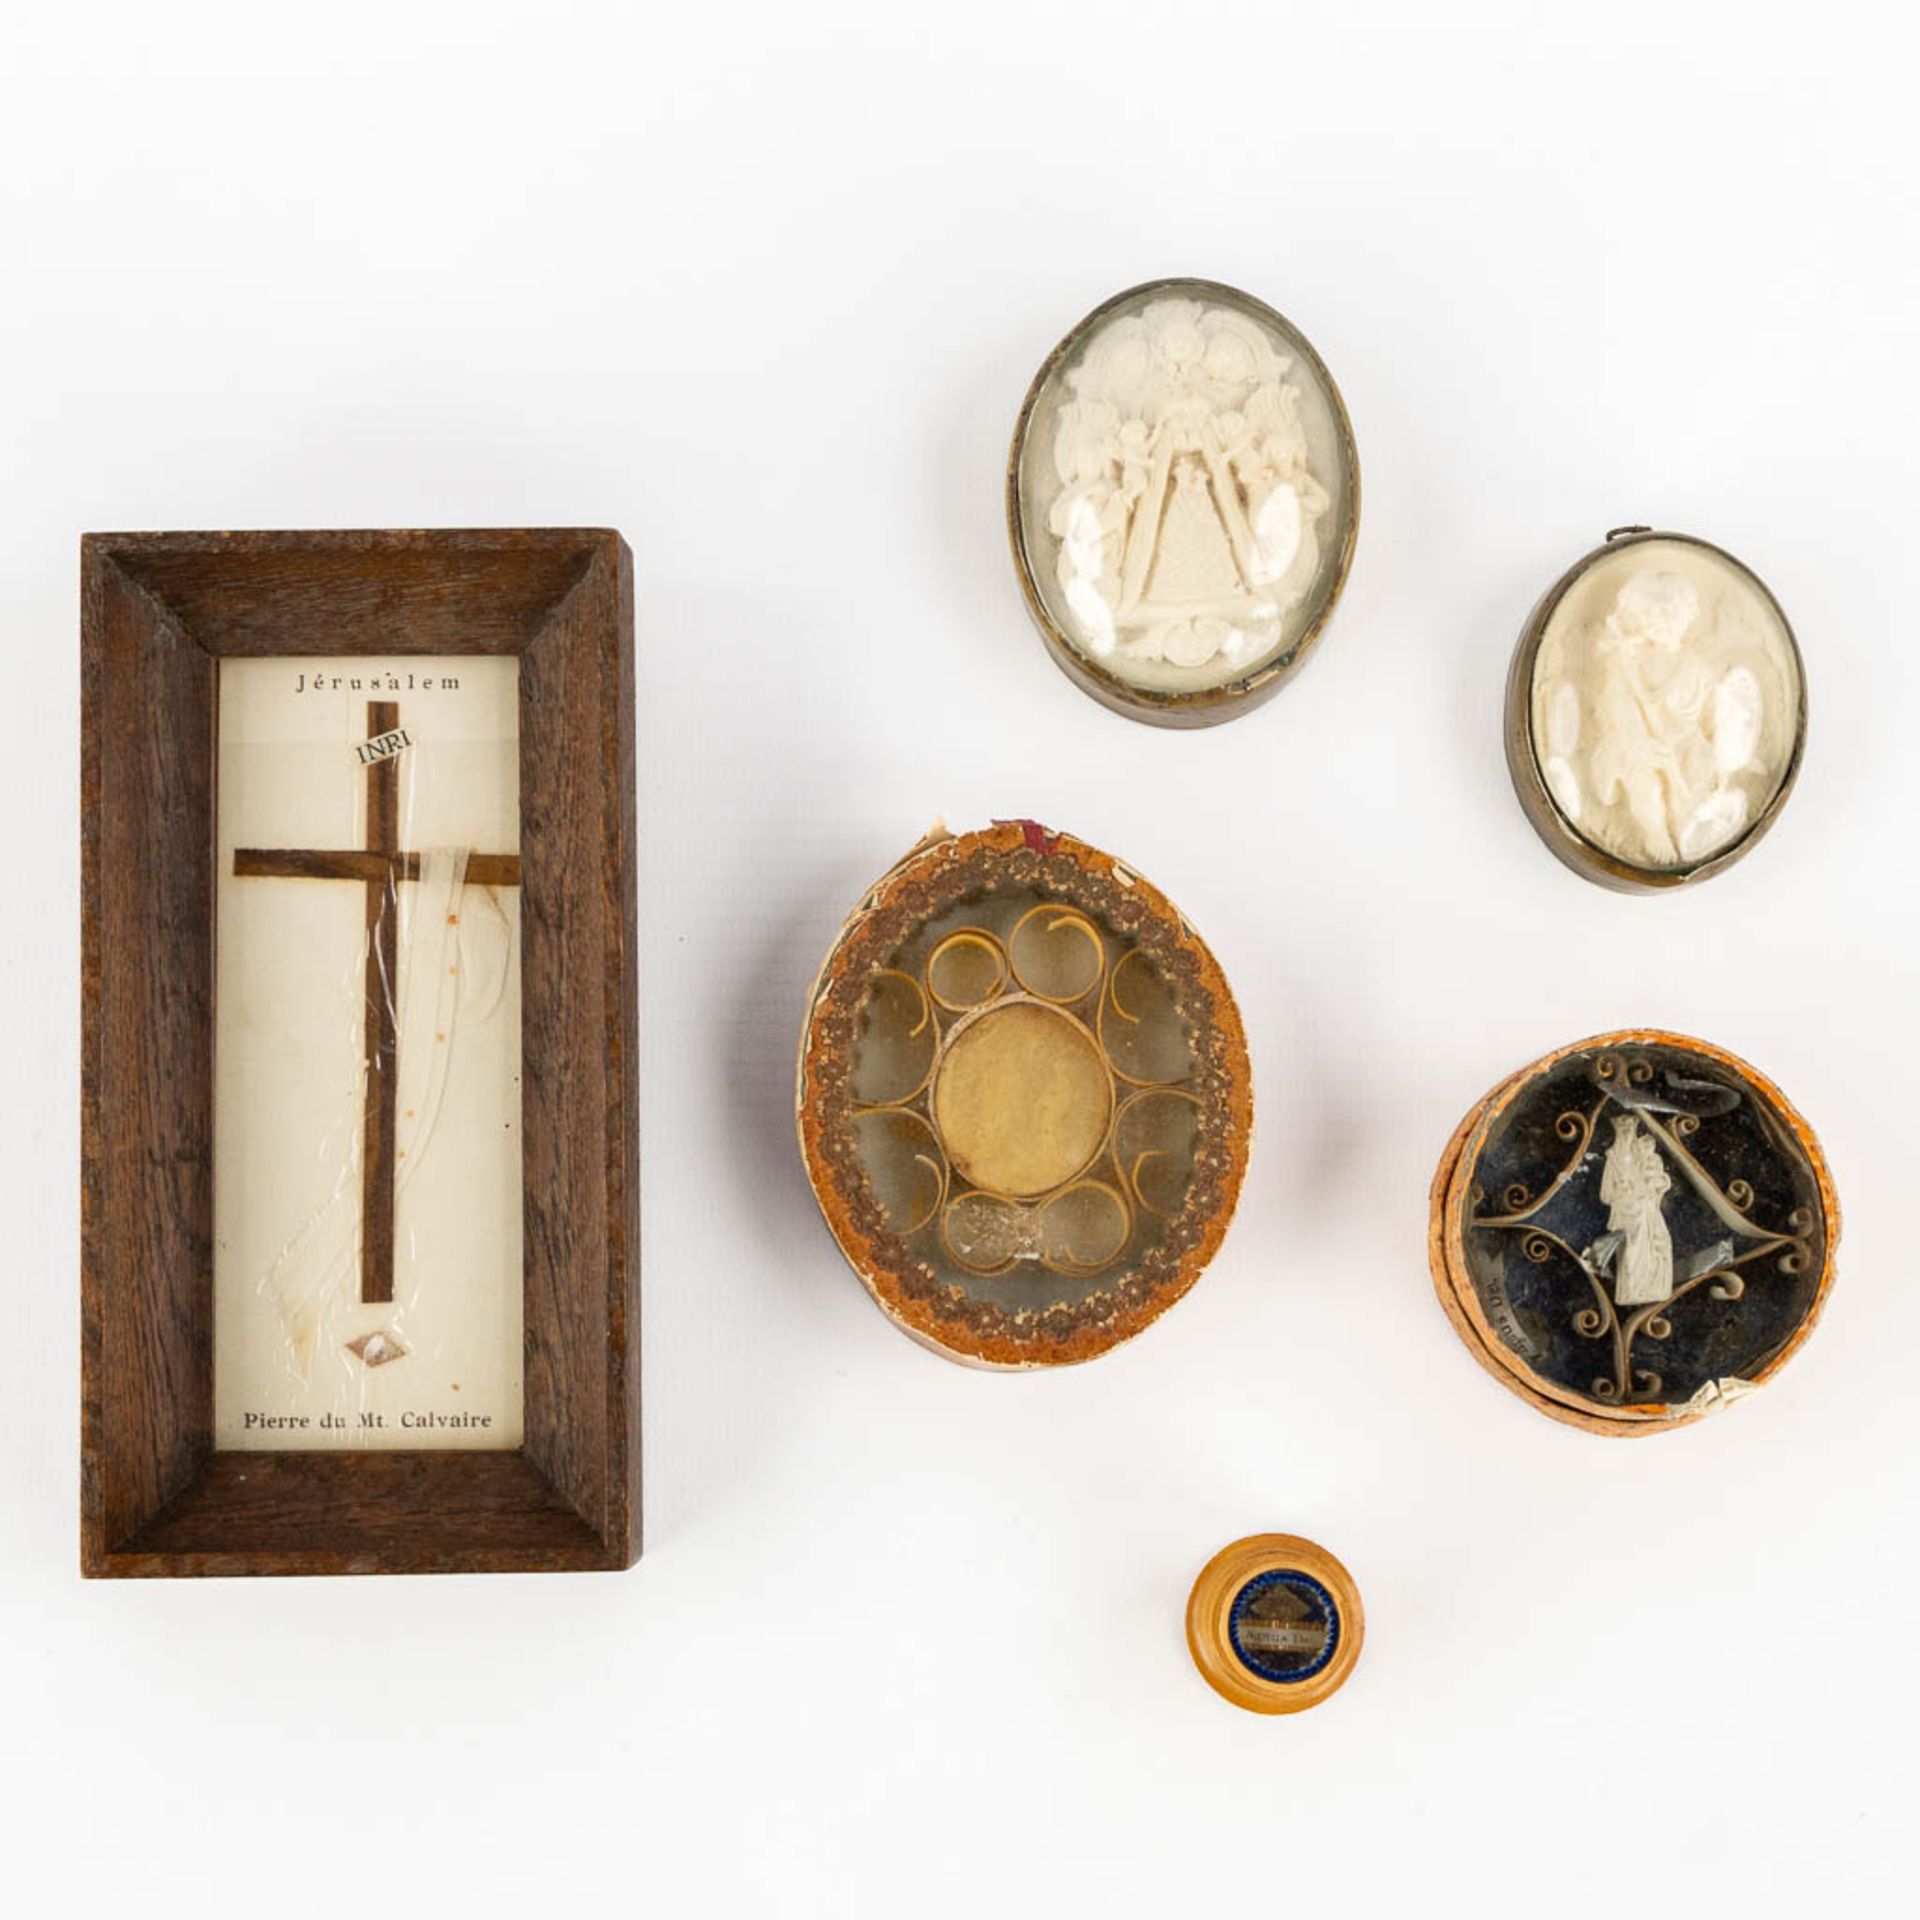 An assembled collection of reliquary items. 19th and 20th C. (W:8 x H:15,5 cm)